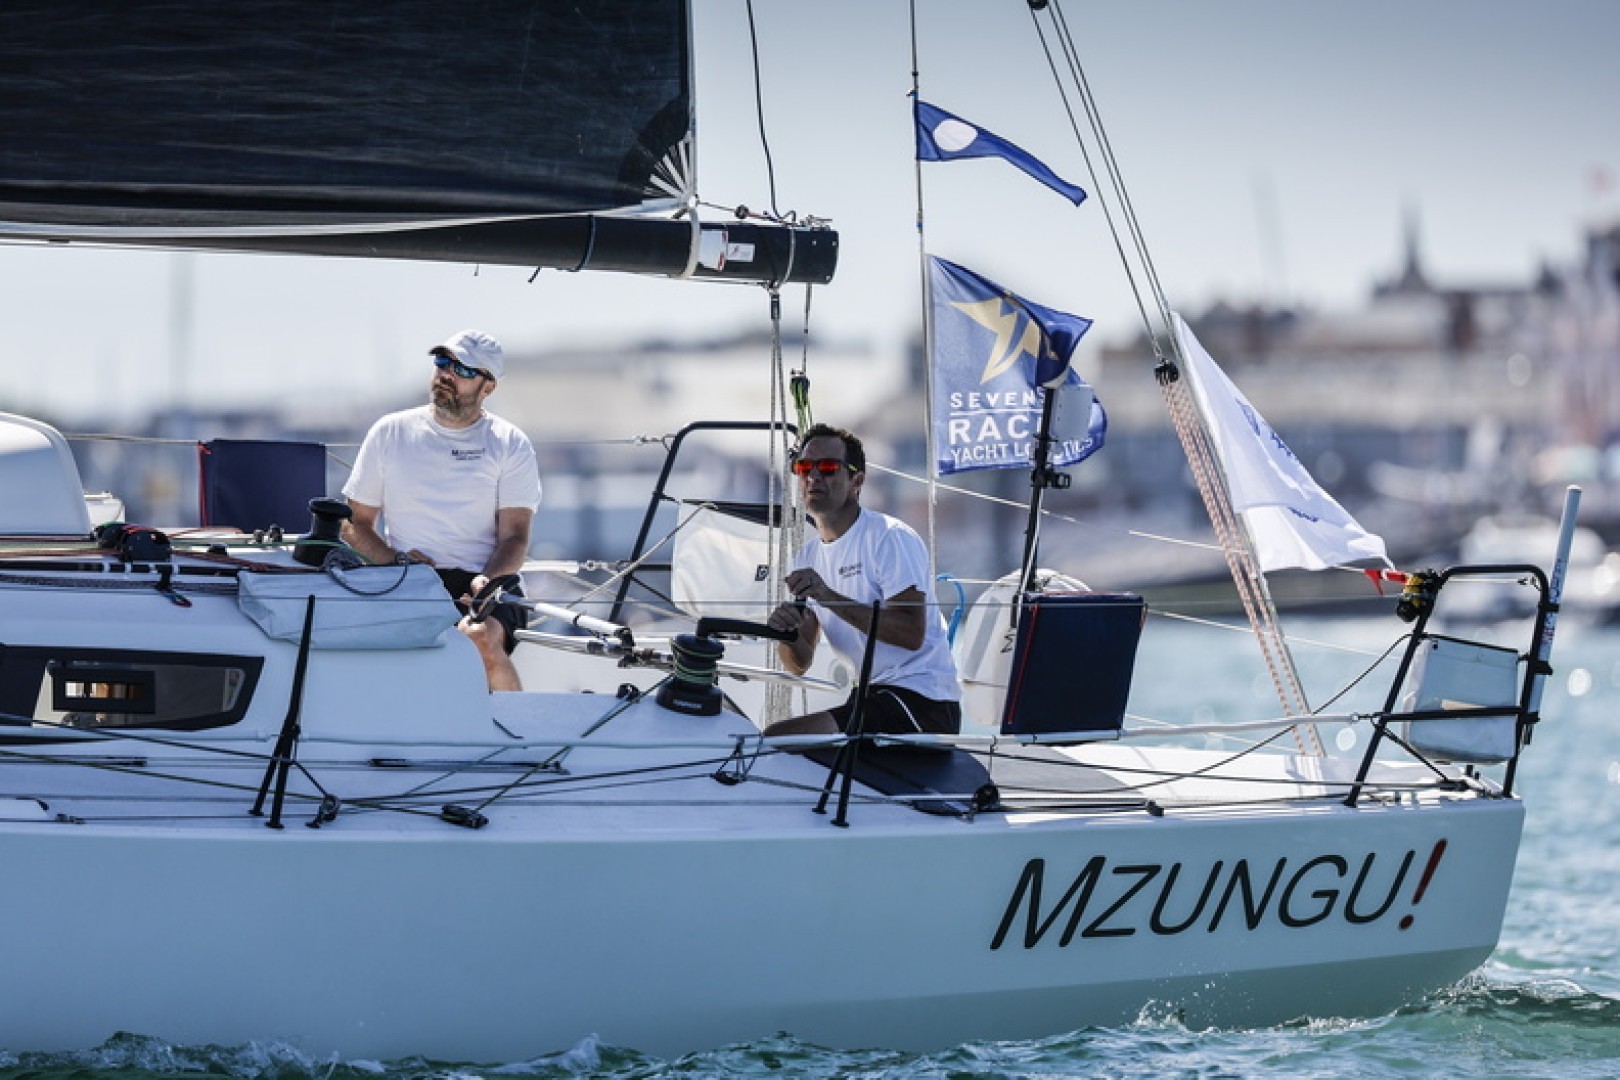 Mzungu! is the new leader in IRC Two-Handed and overall in the Sevenstar Round Britain and Ireland Race © Paul Wyeth